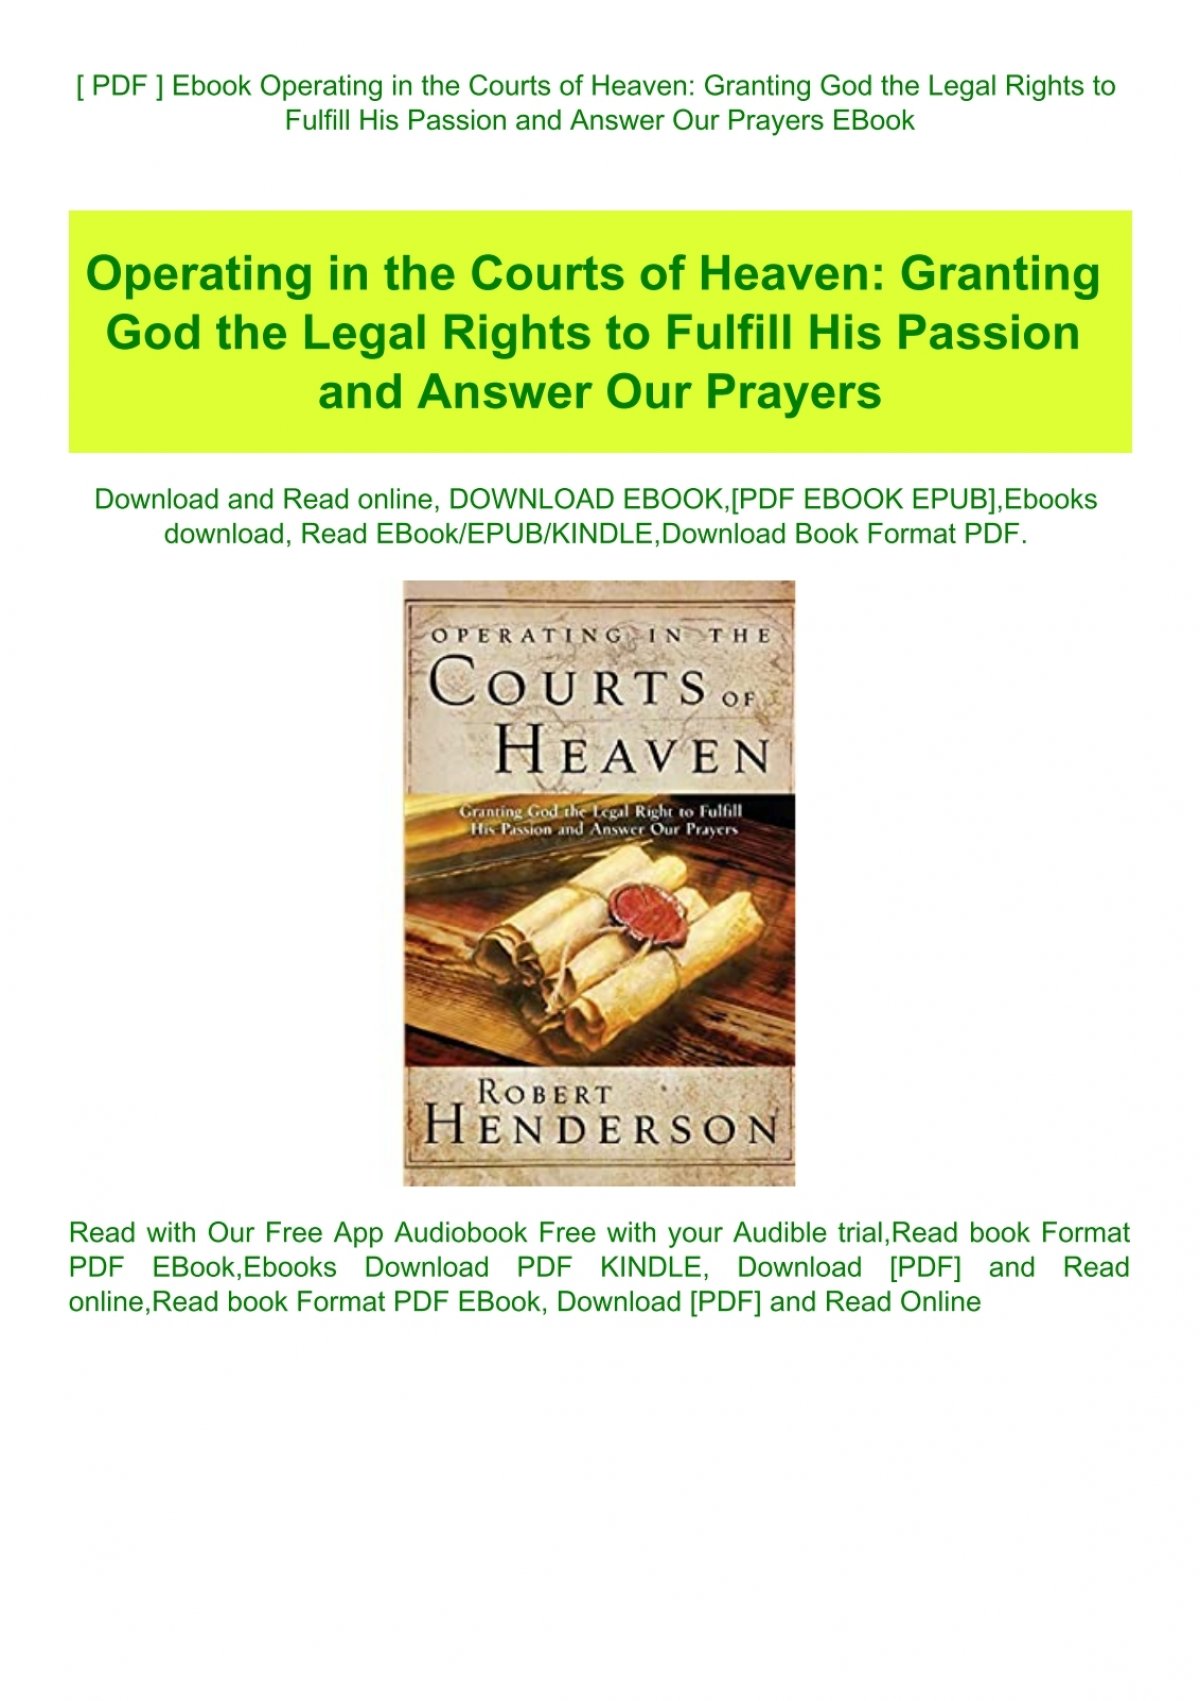 PDF Ebook Operating in the Courts of Heaven Granting God the Legal